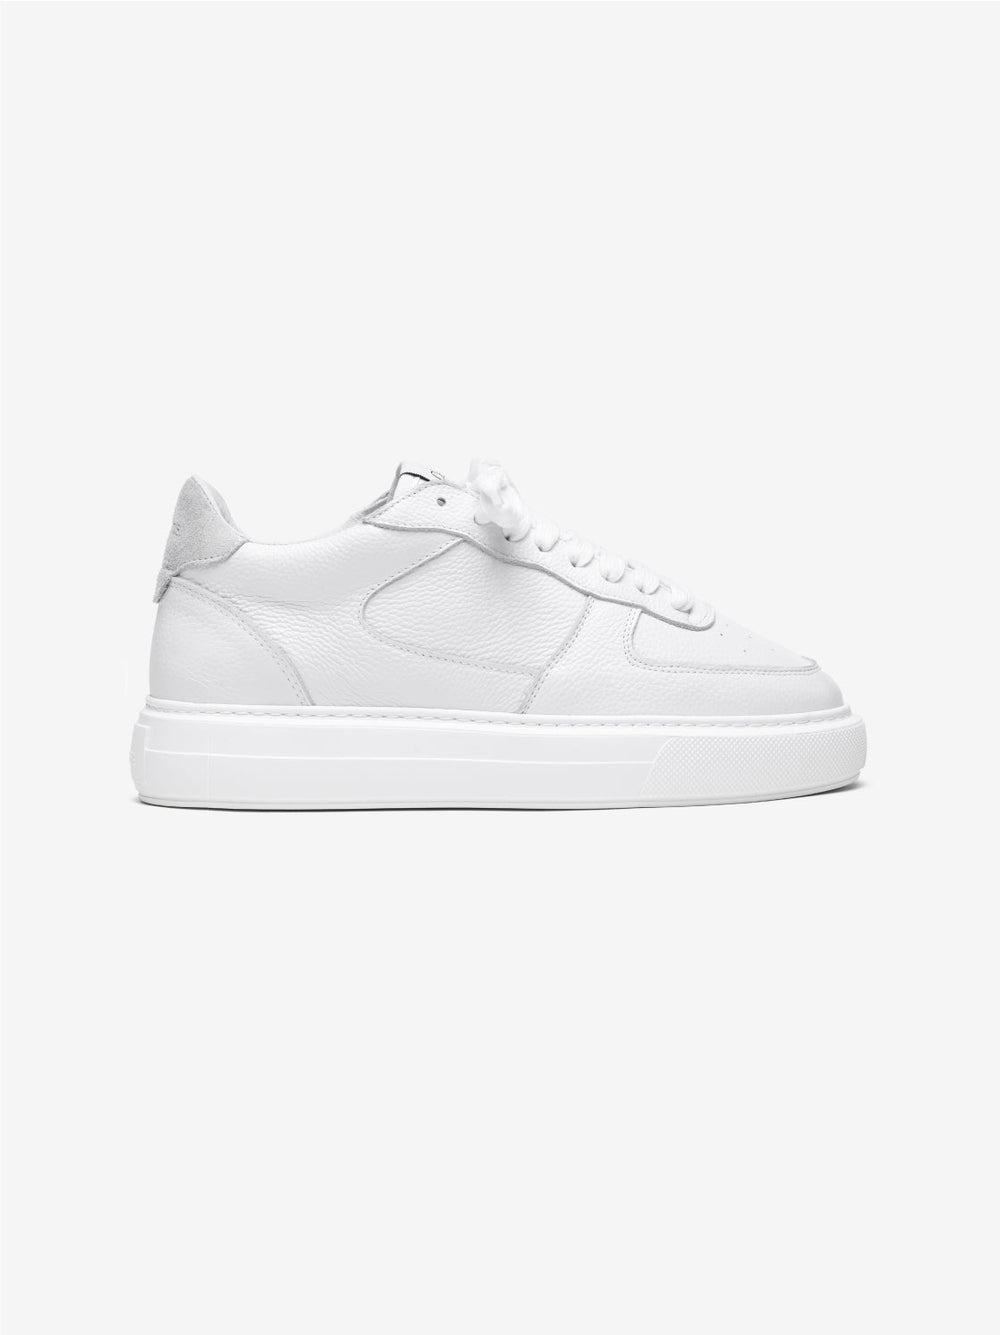 Court Trainer Triple White Tumbled leather-1